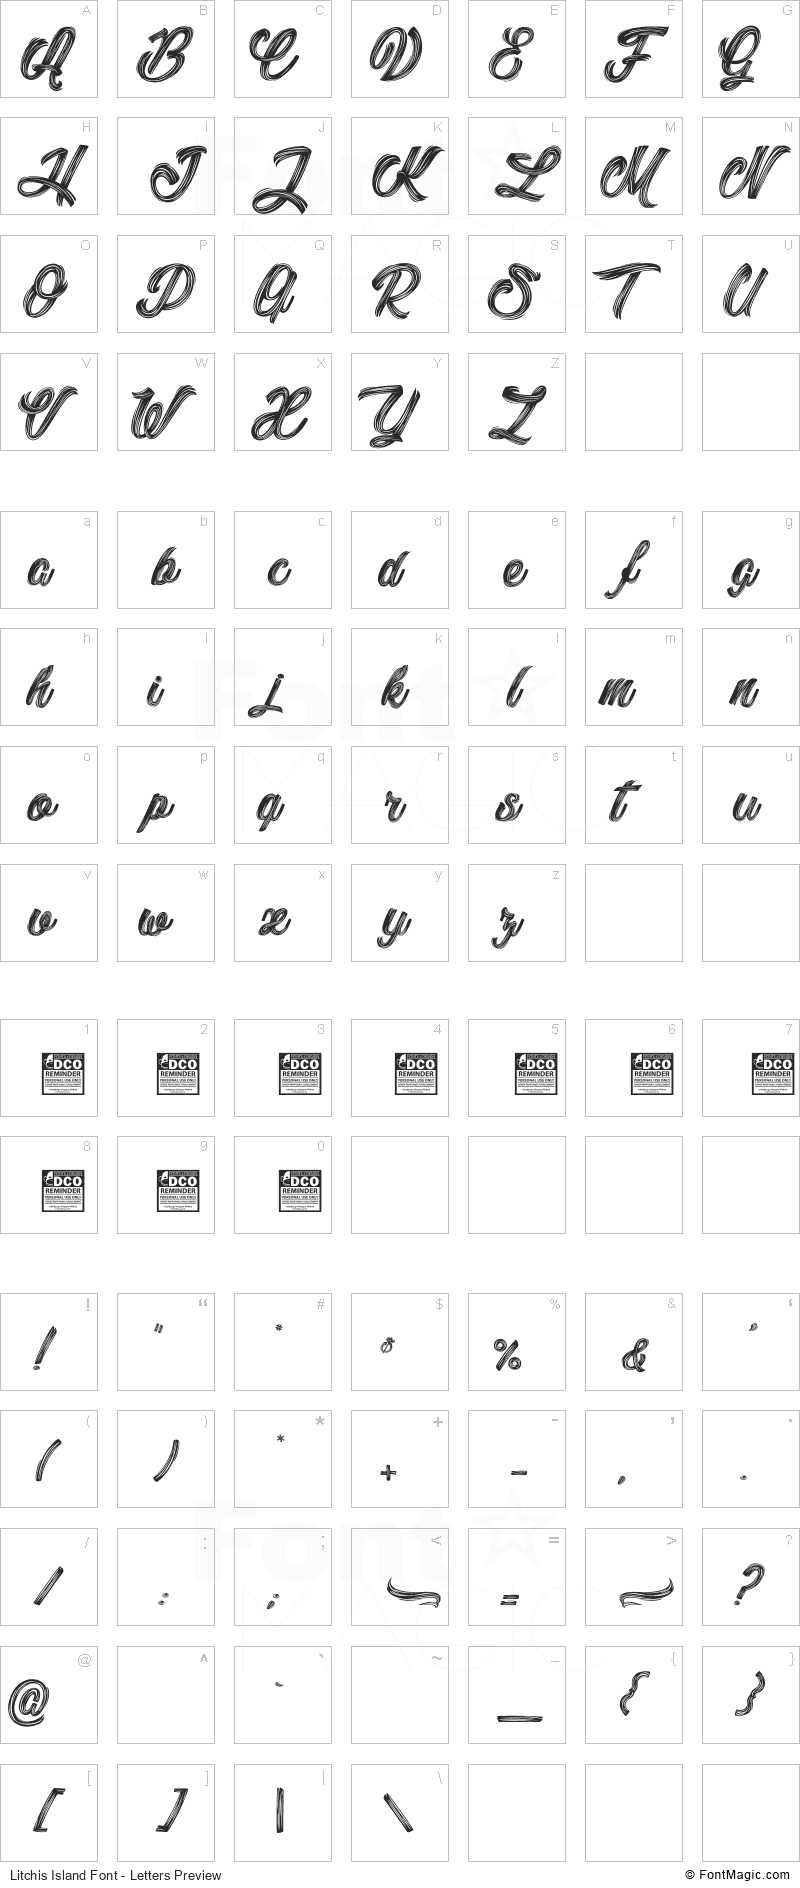 Litchis Island Font - All Latters Preview Chart